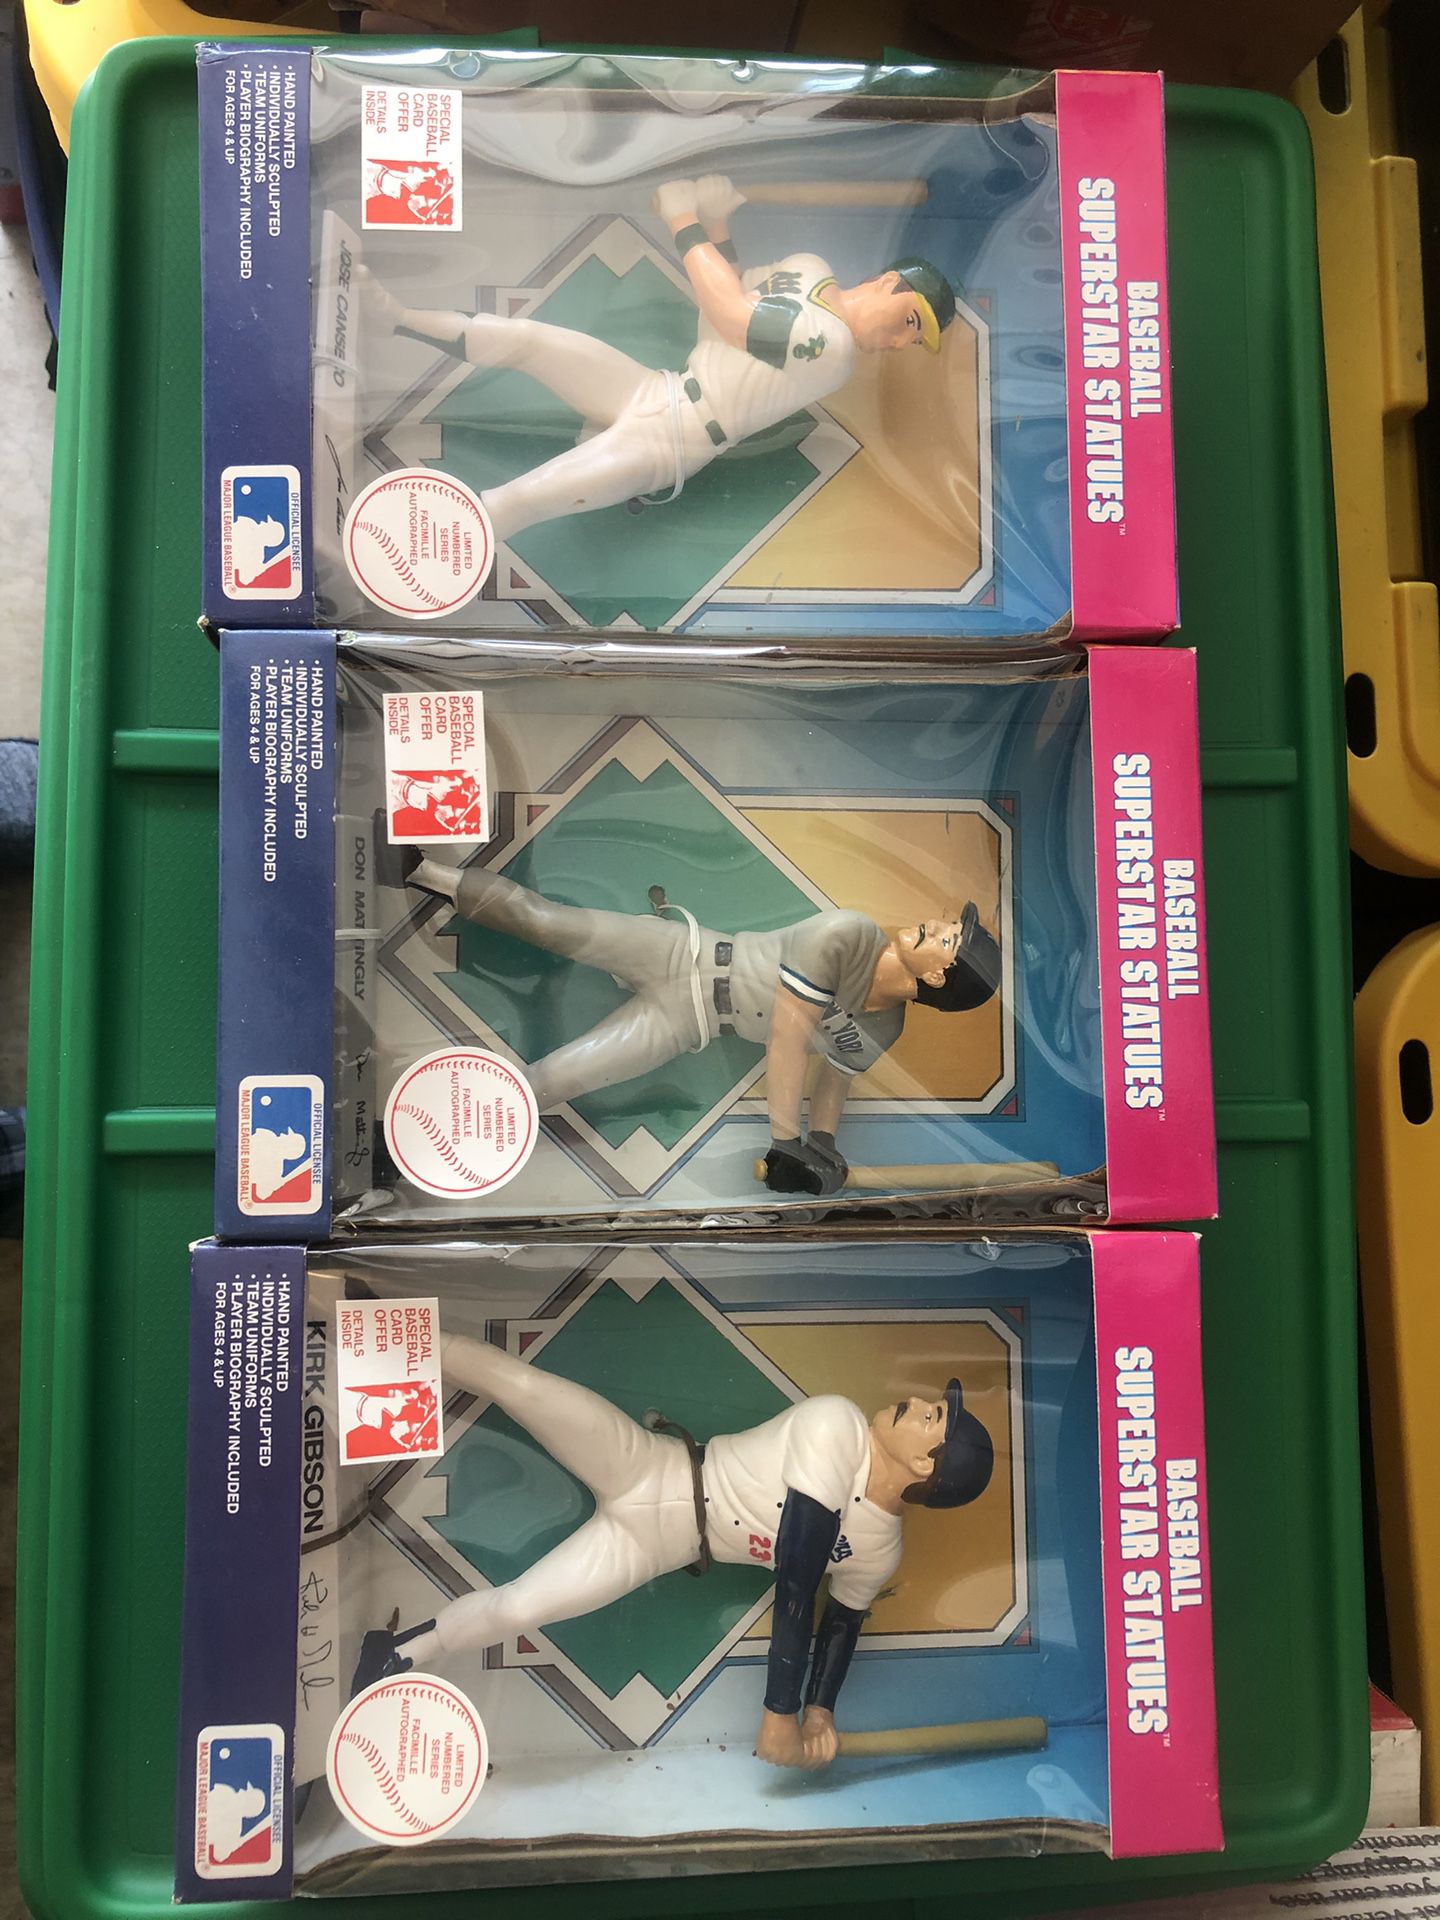 3 1988 Baseball Superstar Statues -Mattingly Gibson Canseco